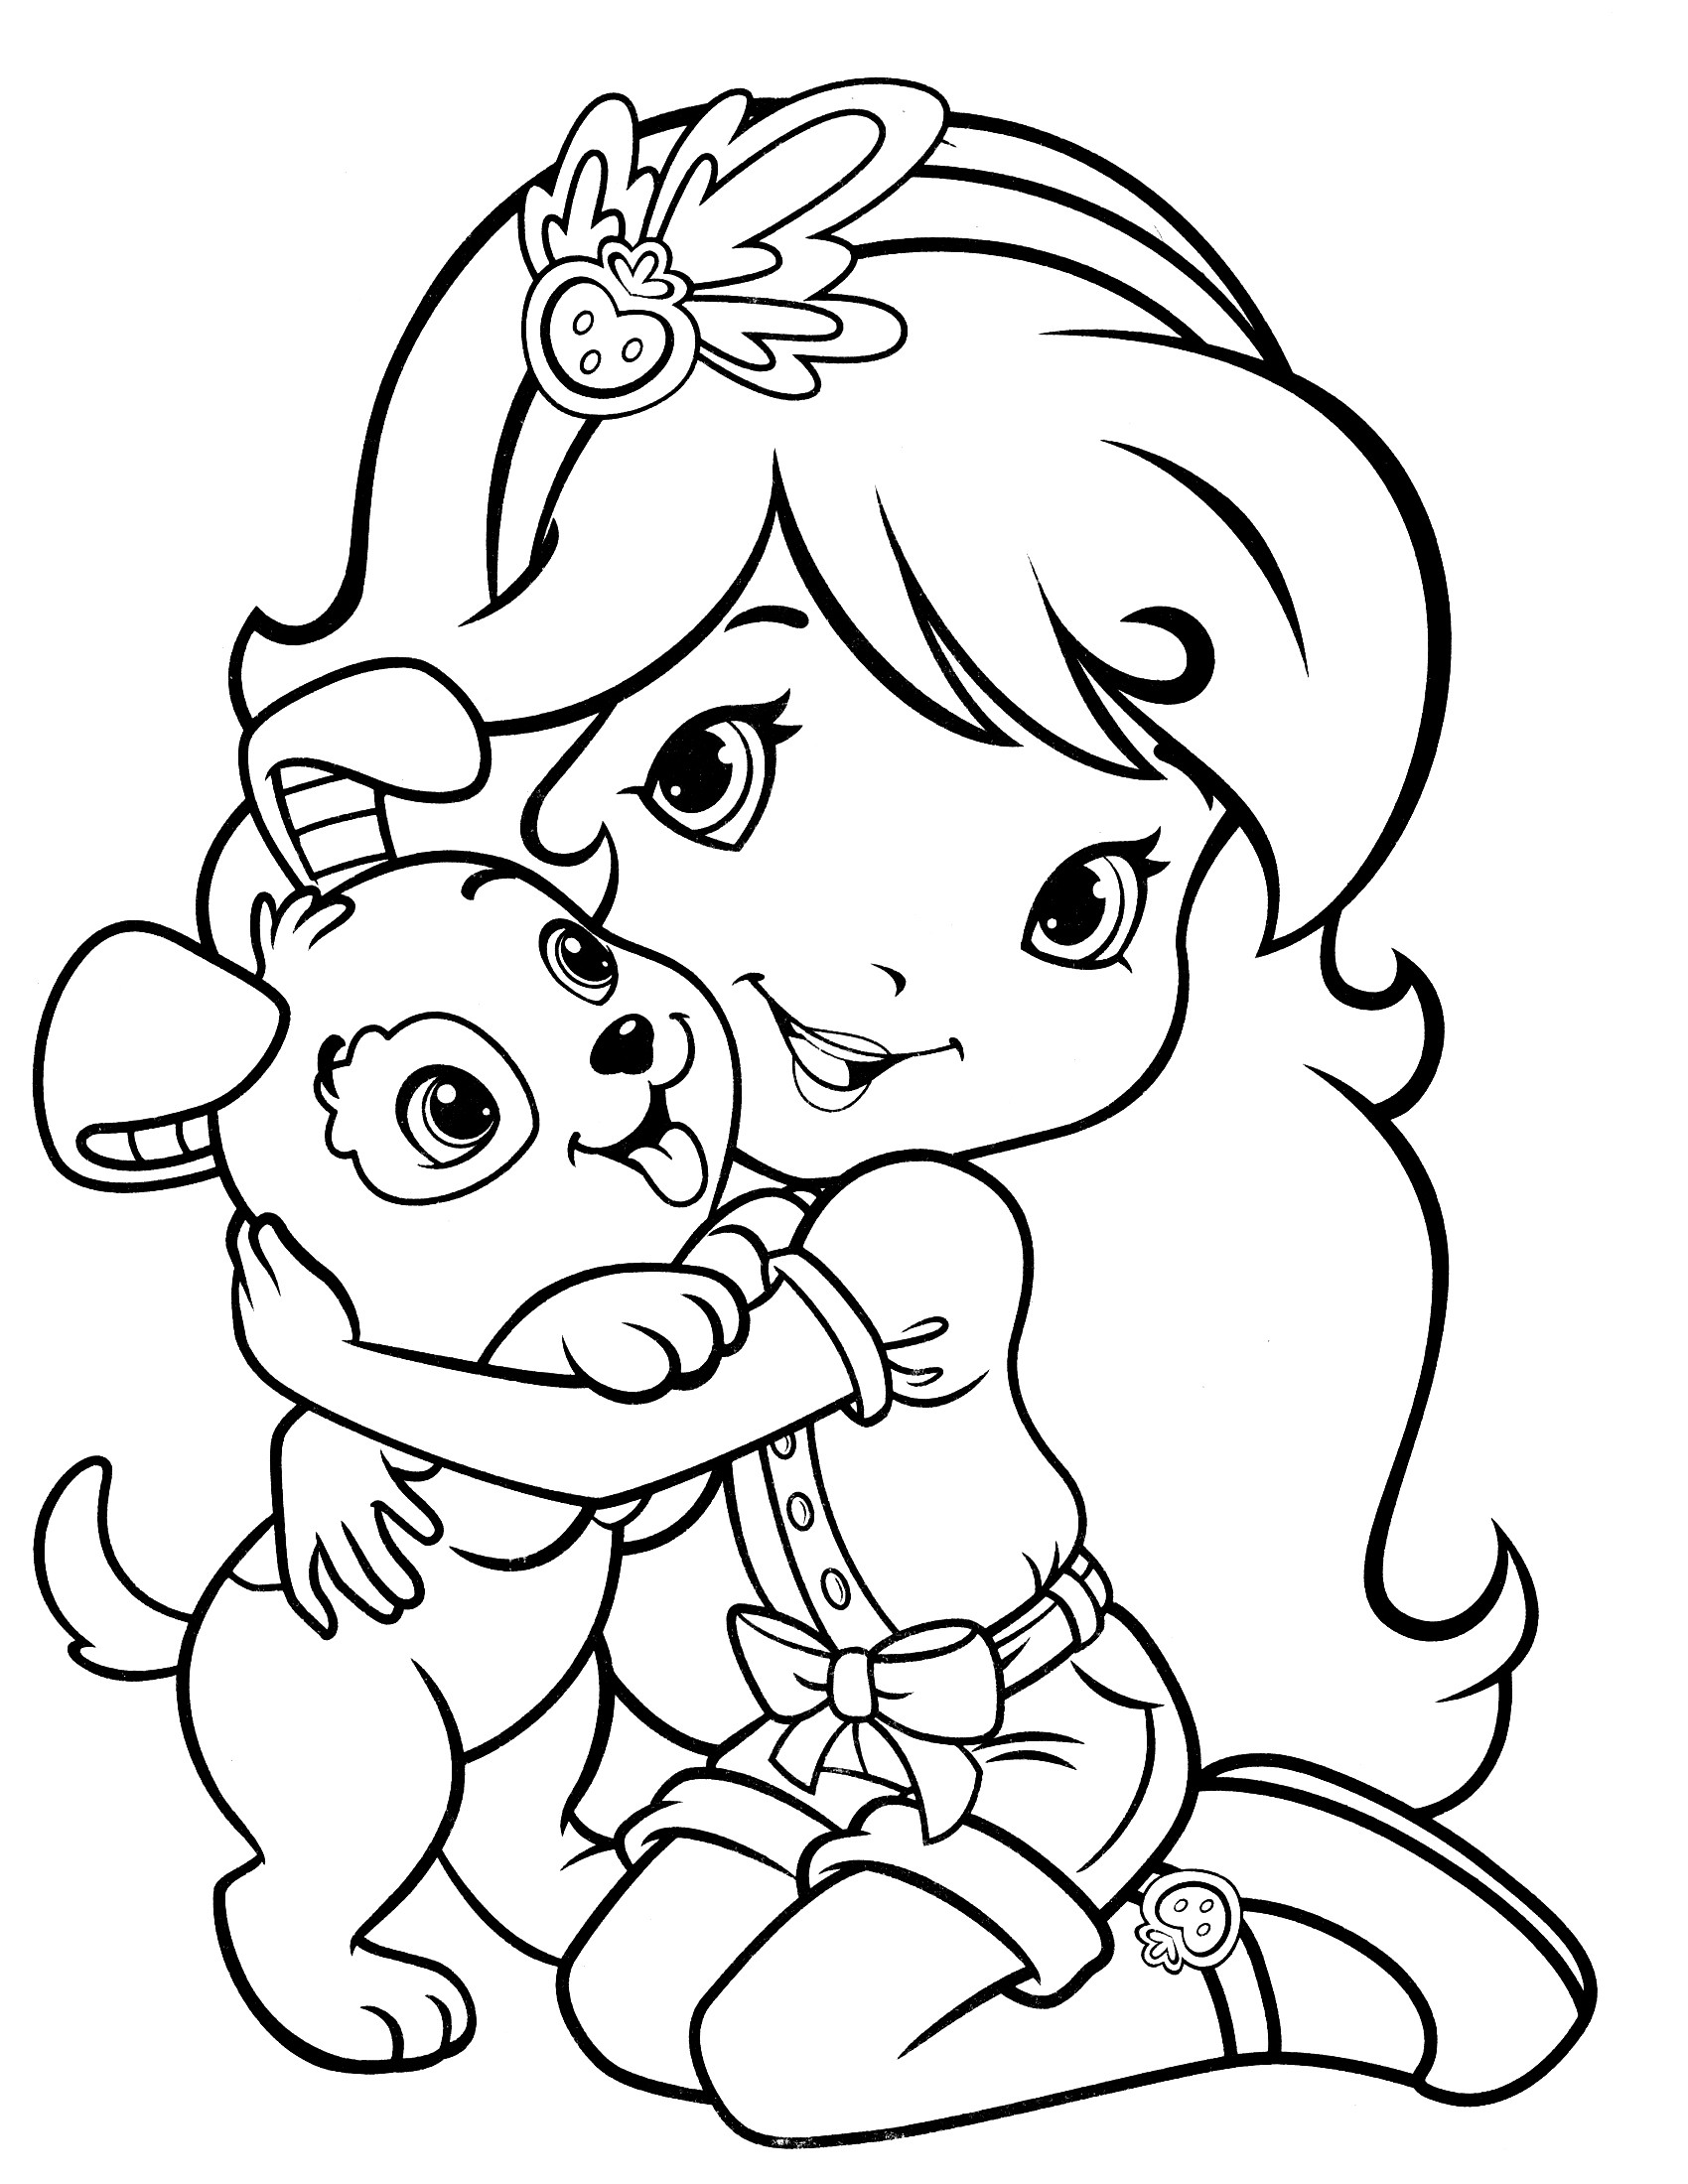 Strawberry Shortcake Coloring Page
 Free Coloring Pages Shortcake Dog